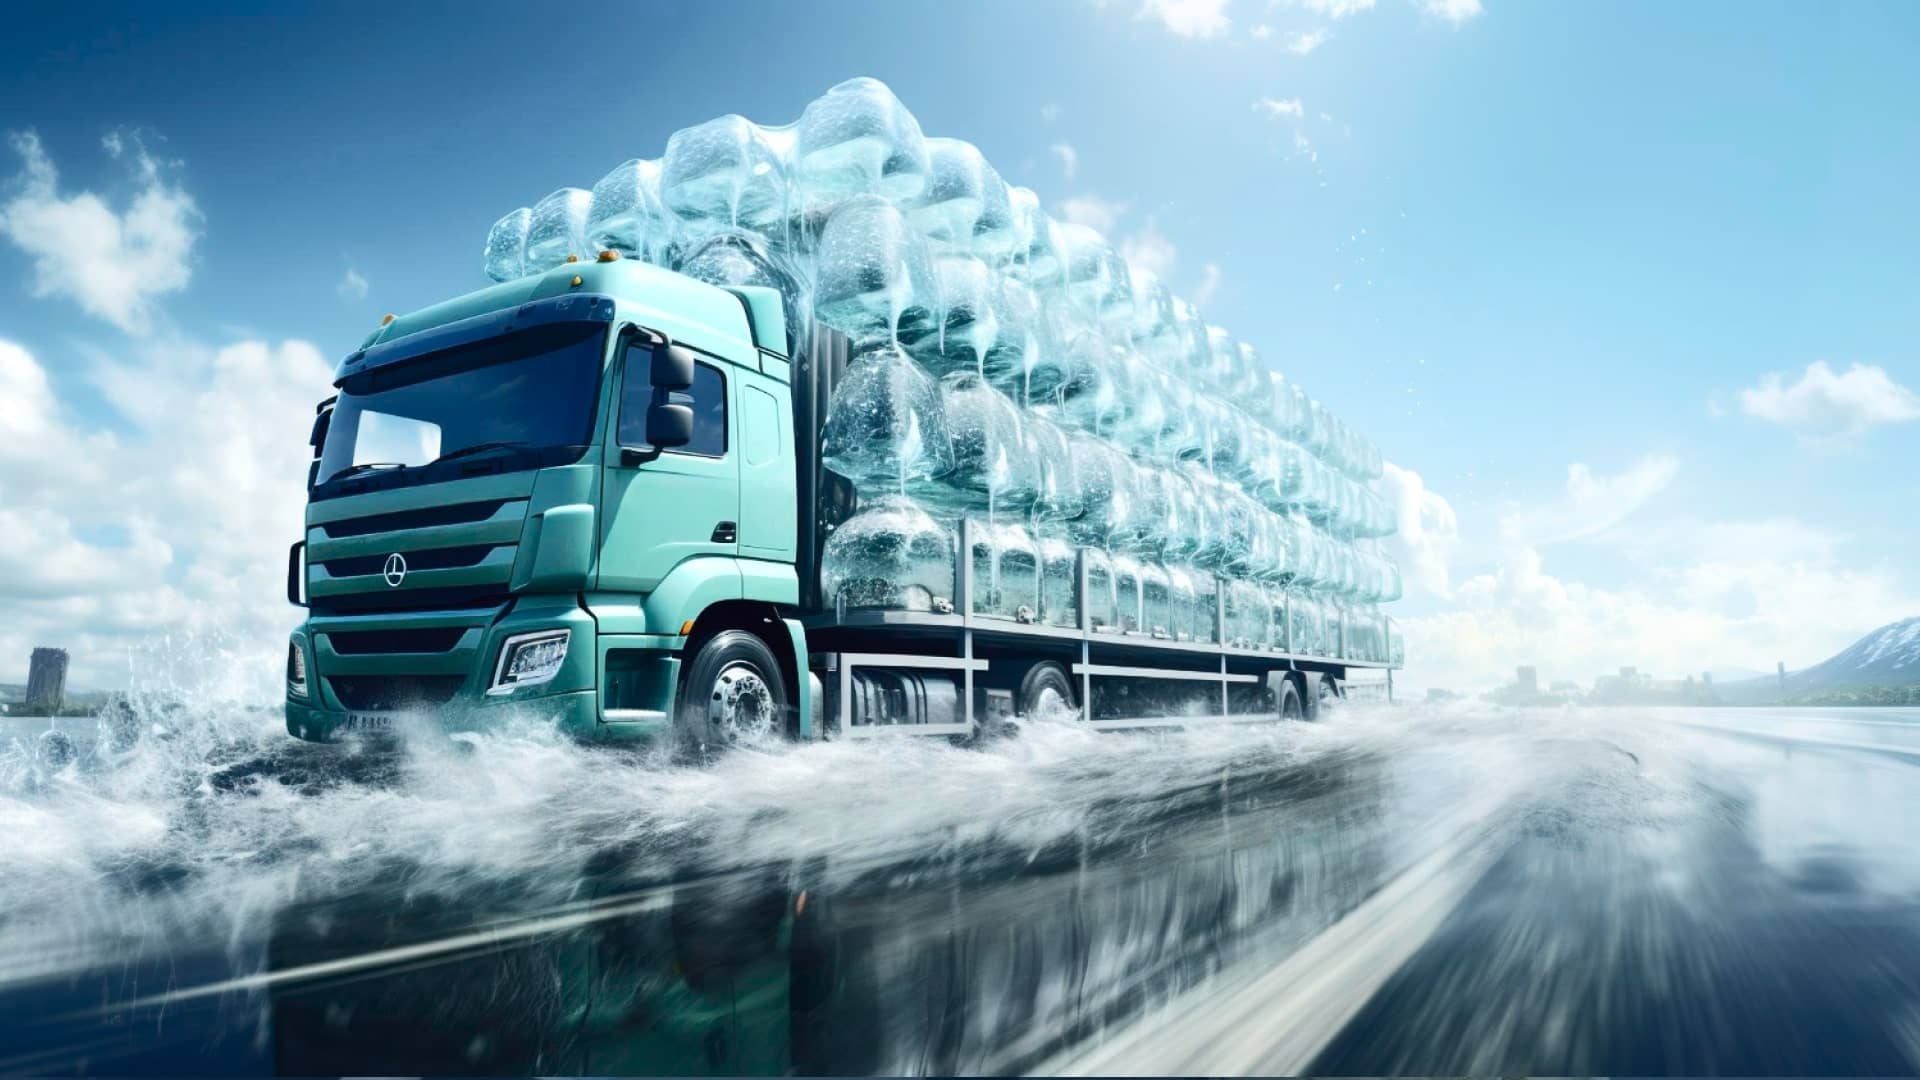 The role of iot in enhancing refrigerated logistics